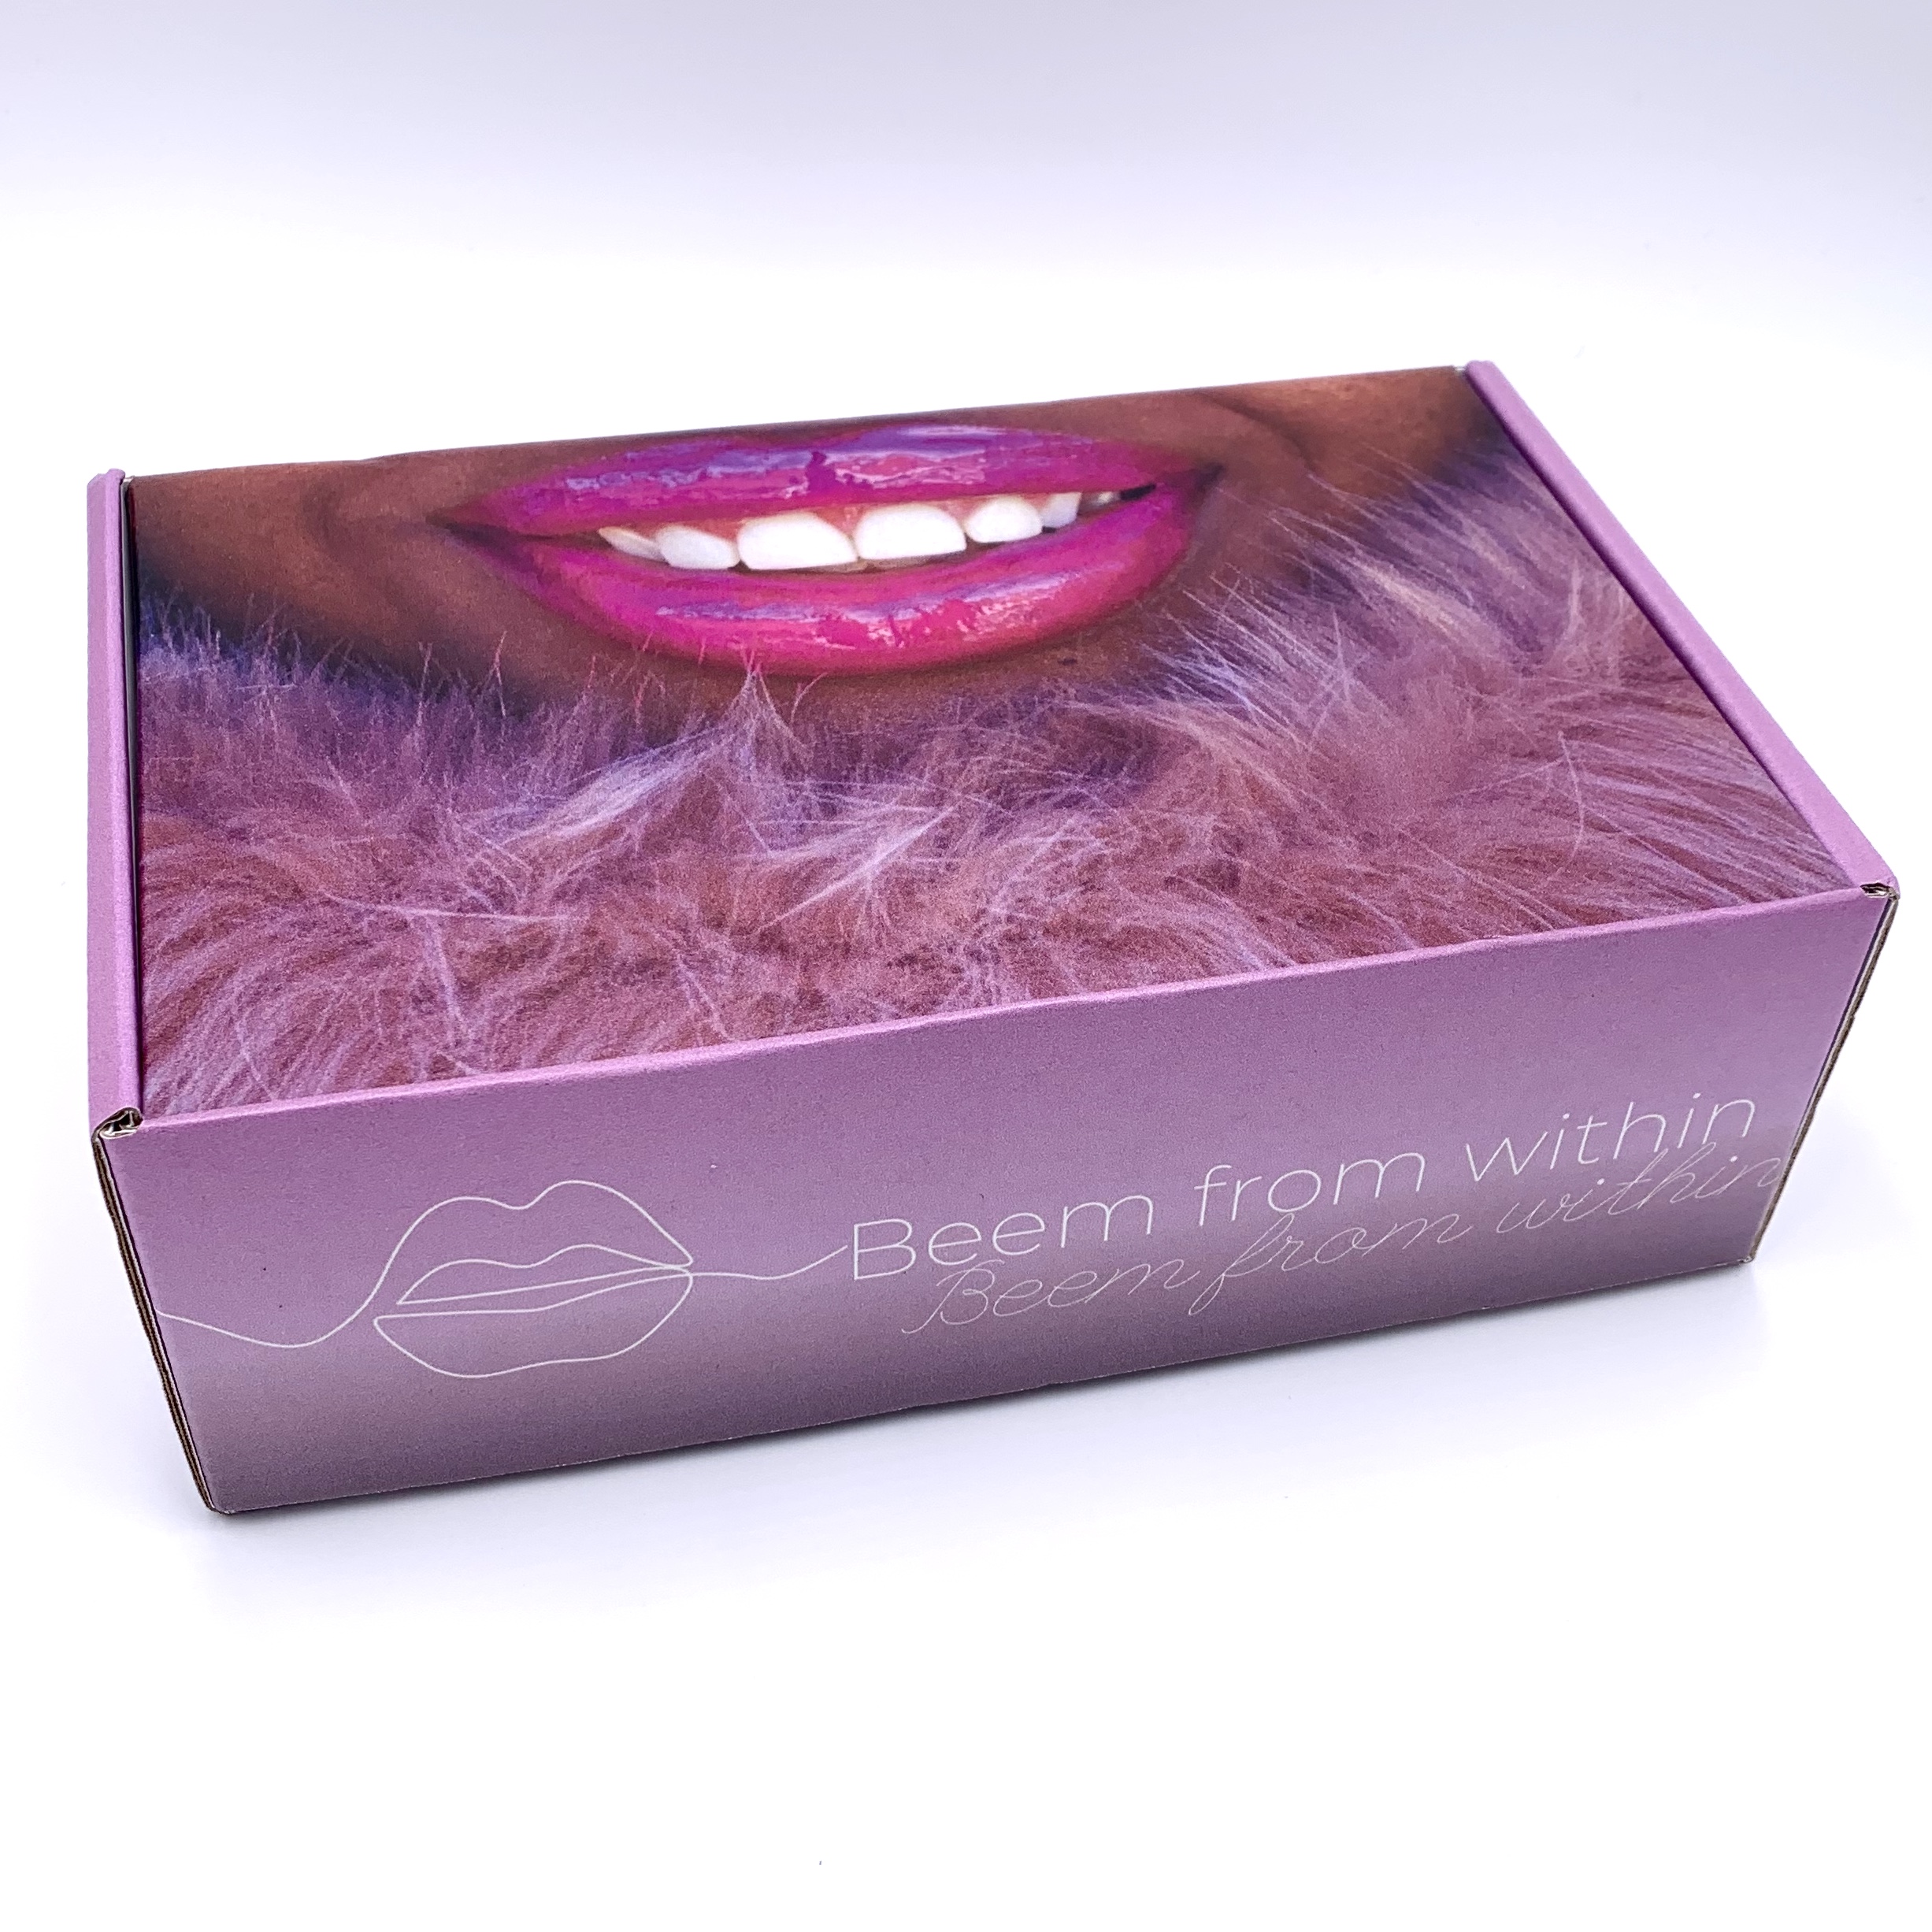 Box for The Beem Box July 2020